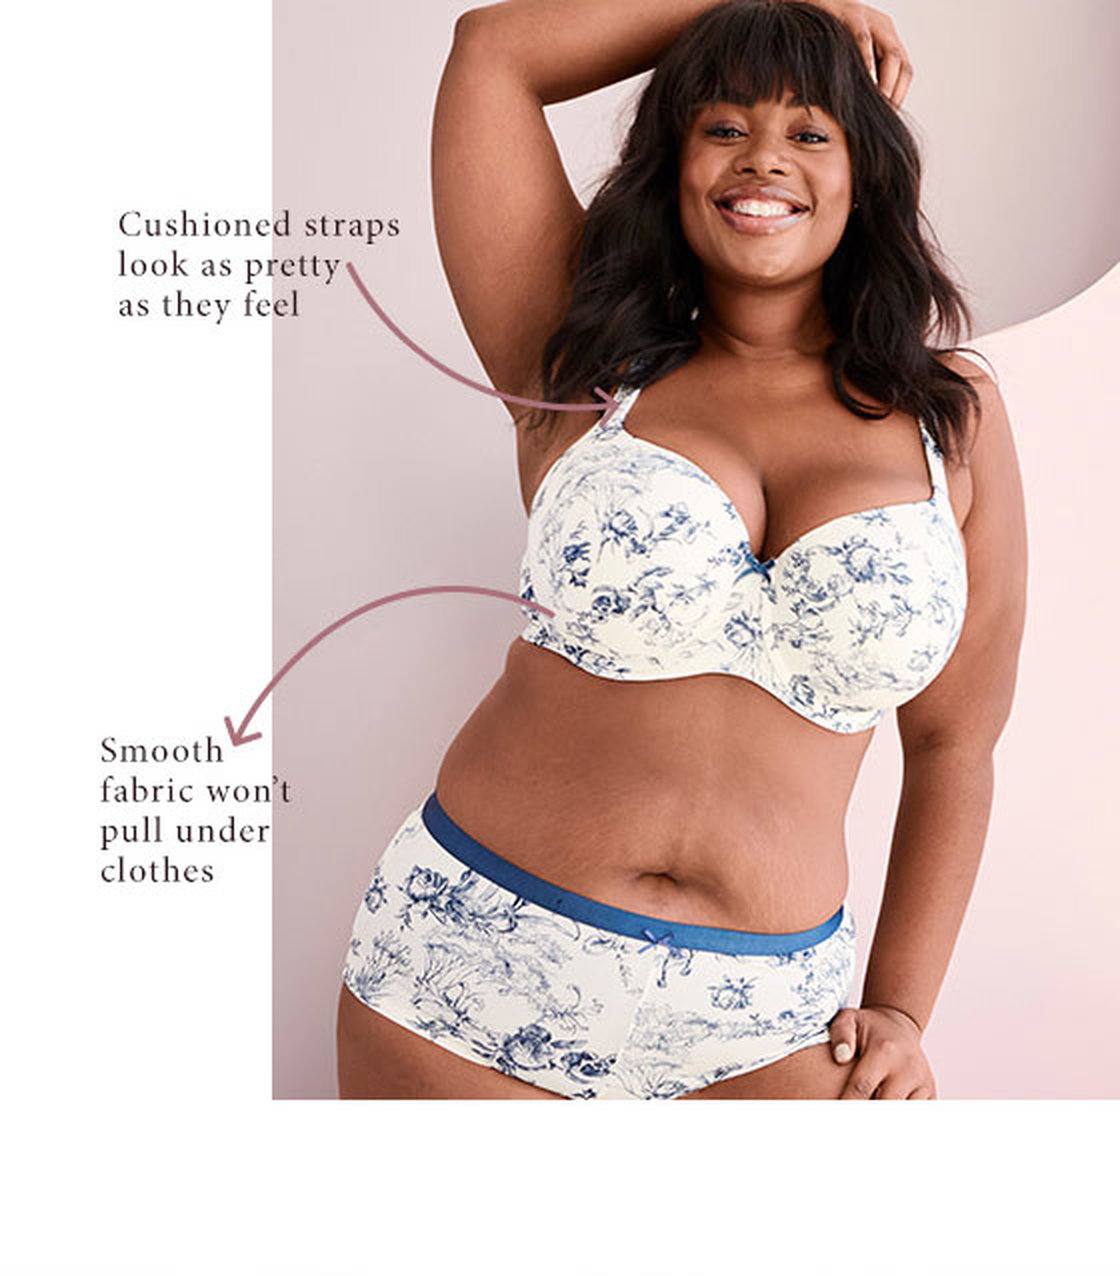 Lane Bryant: Look what's NEW! The Boost Balconette Bra.